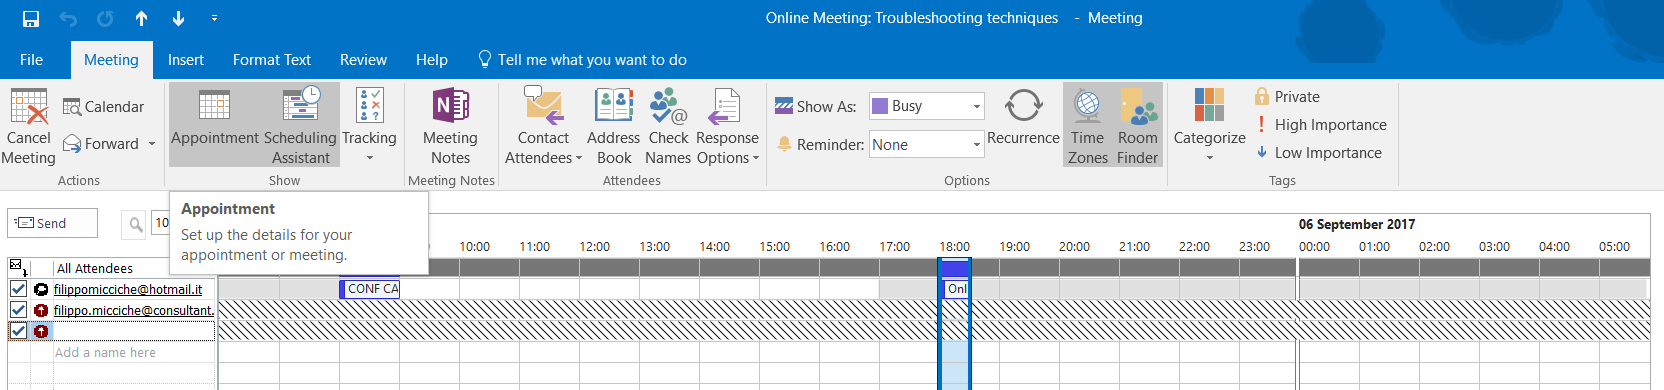 How To Troubleshoot Meeting Invitations In Outlook